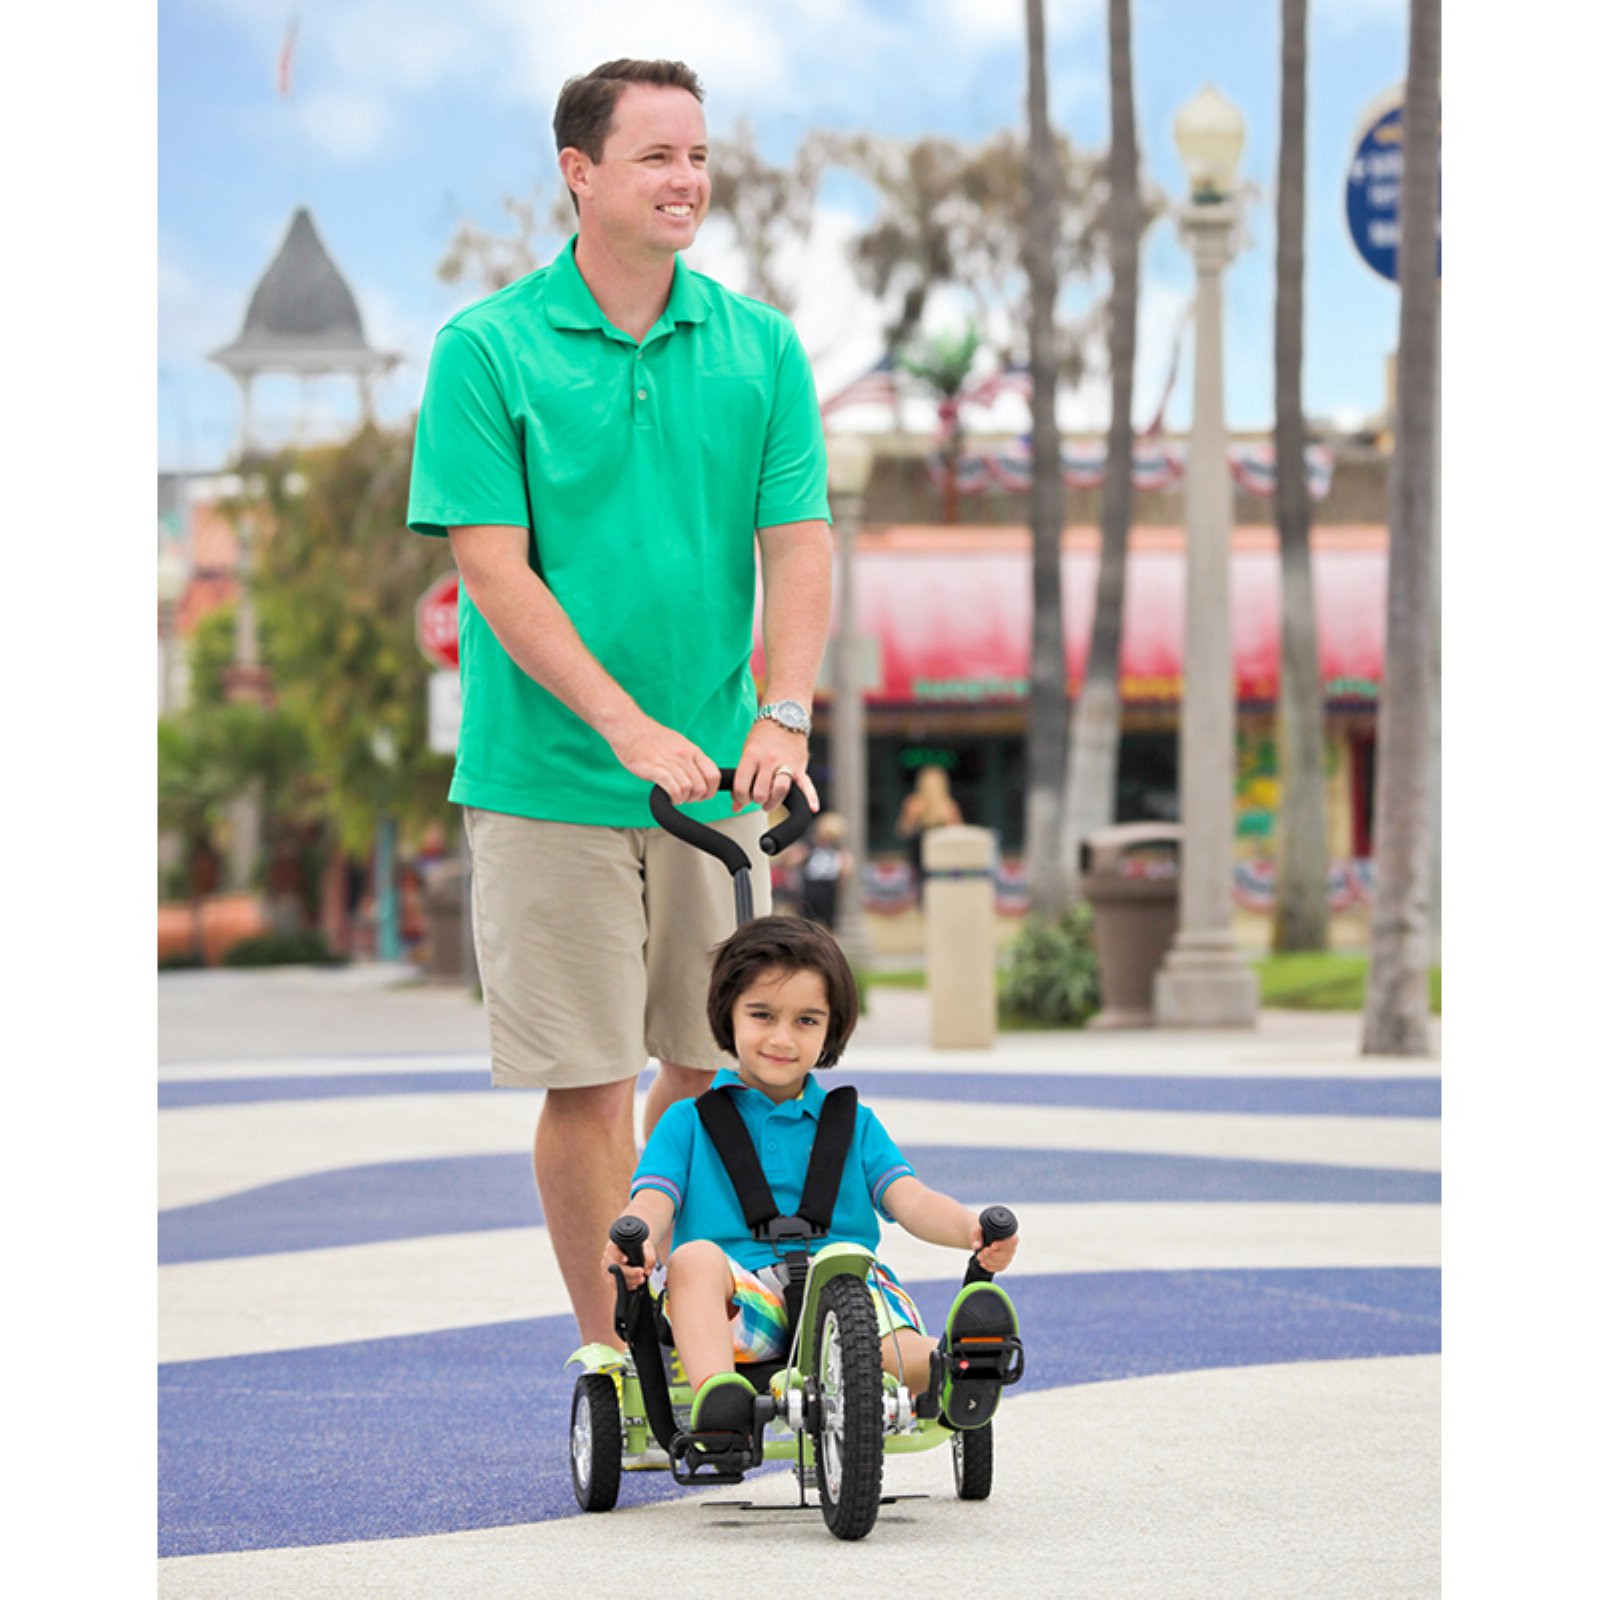 Mobo Mega Mini: The Roll-to-Ride 3-Wheeled Cruiser Tricycle, Push & Pedal Ride On Toy, Green - image 3 of 7